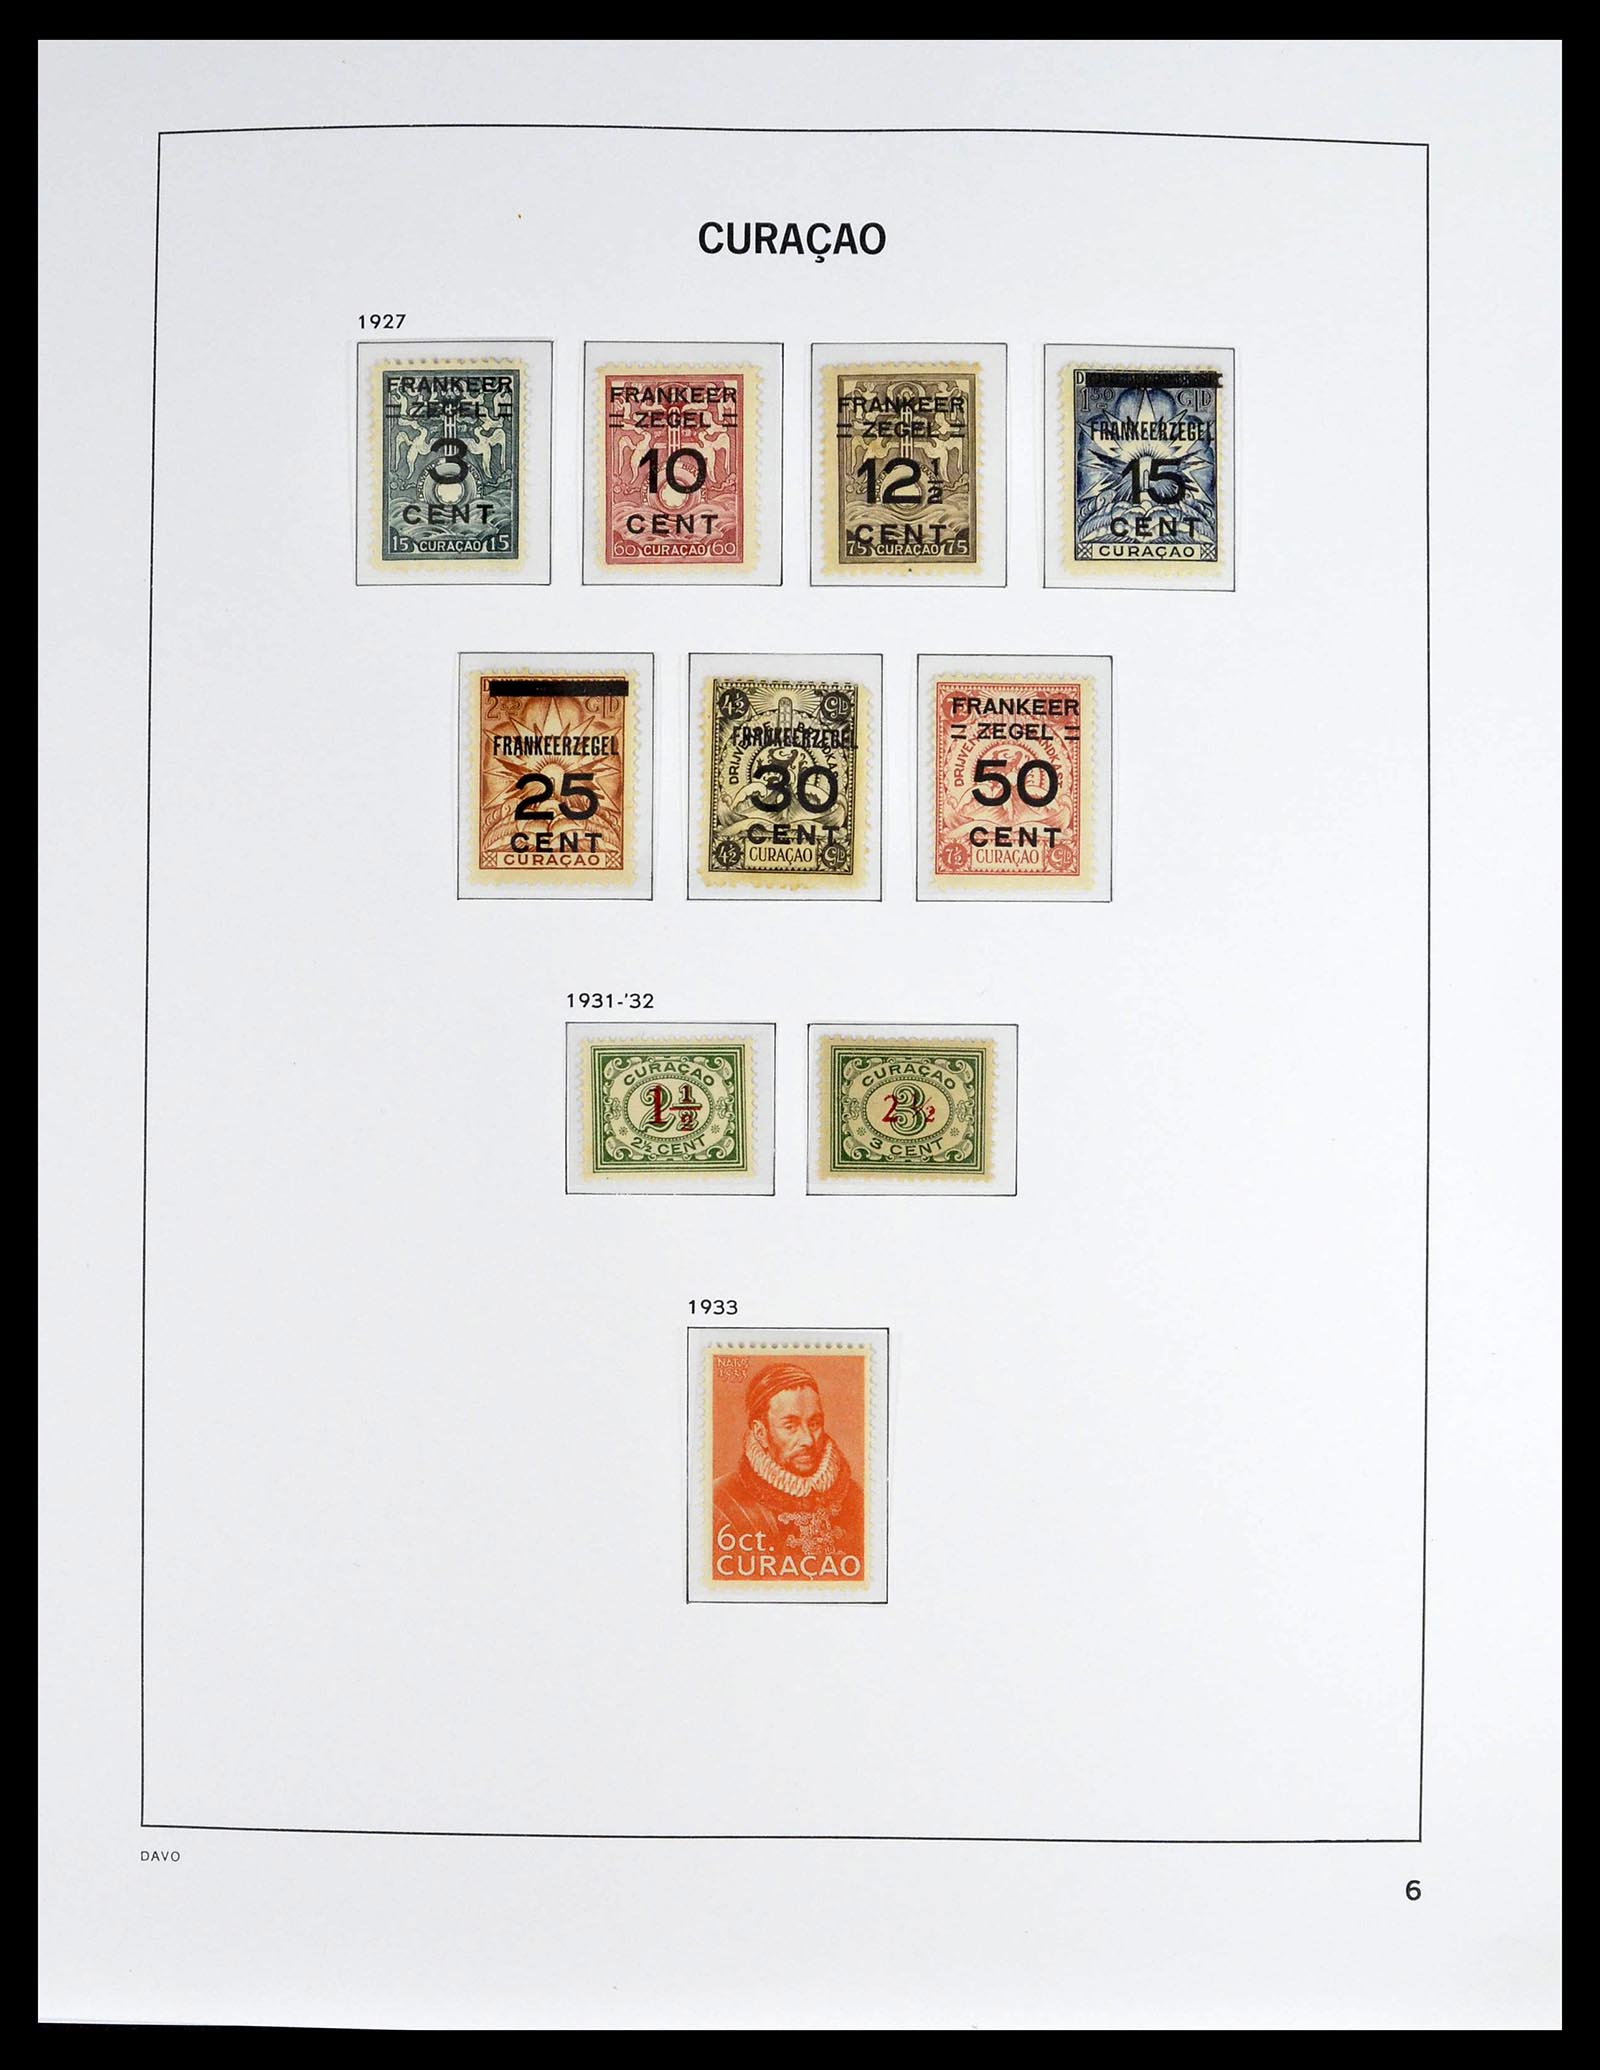 39360 0006 - Stamp collection 39360 Curaçao/Antilles complete 1873-2013.